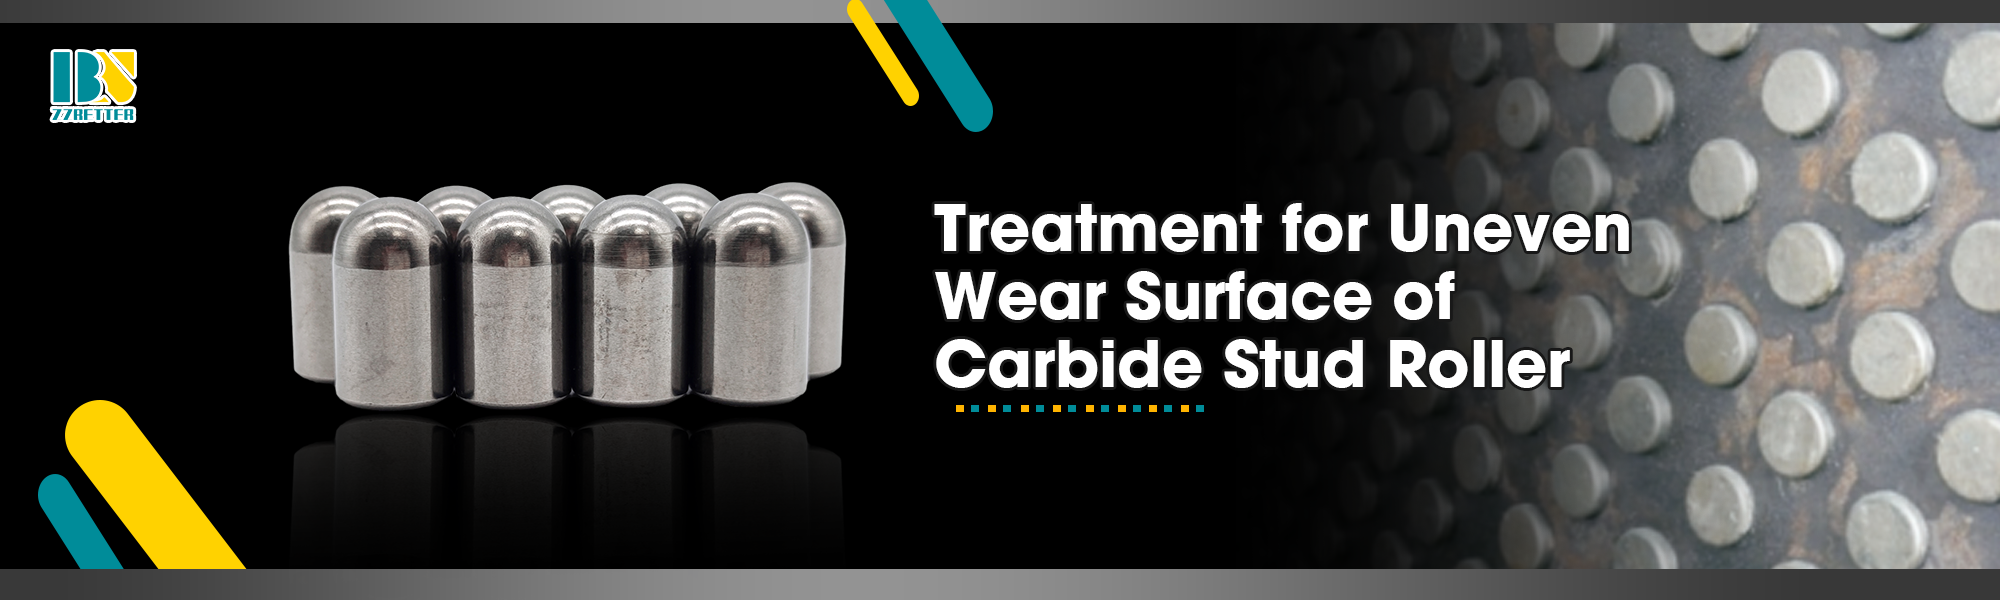 Treatment for Uneven Wear Surface of Carbide Stud Roller